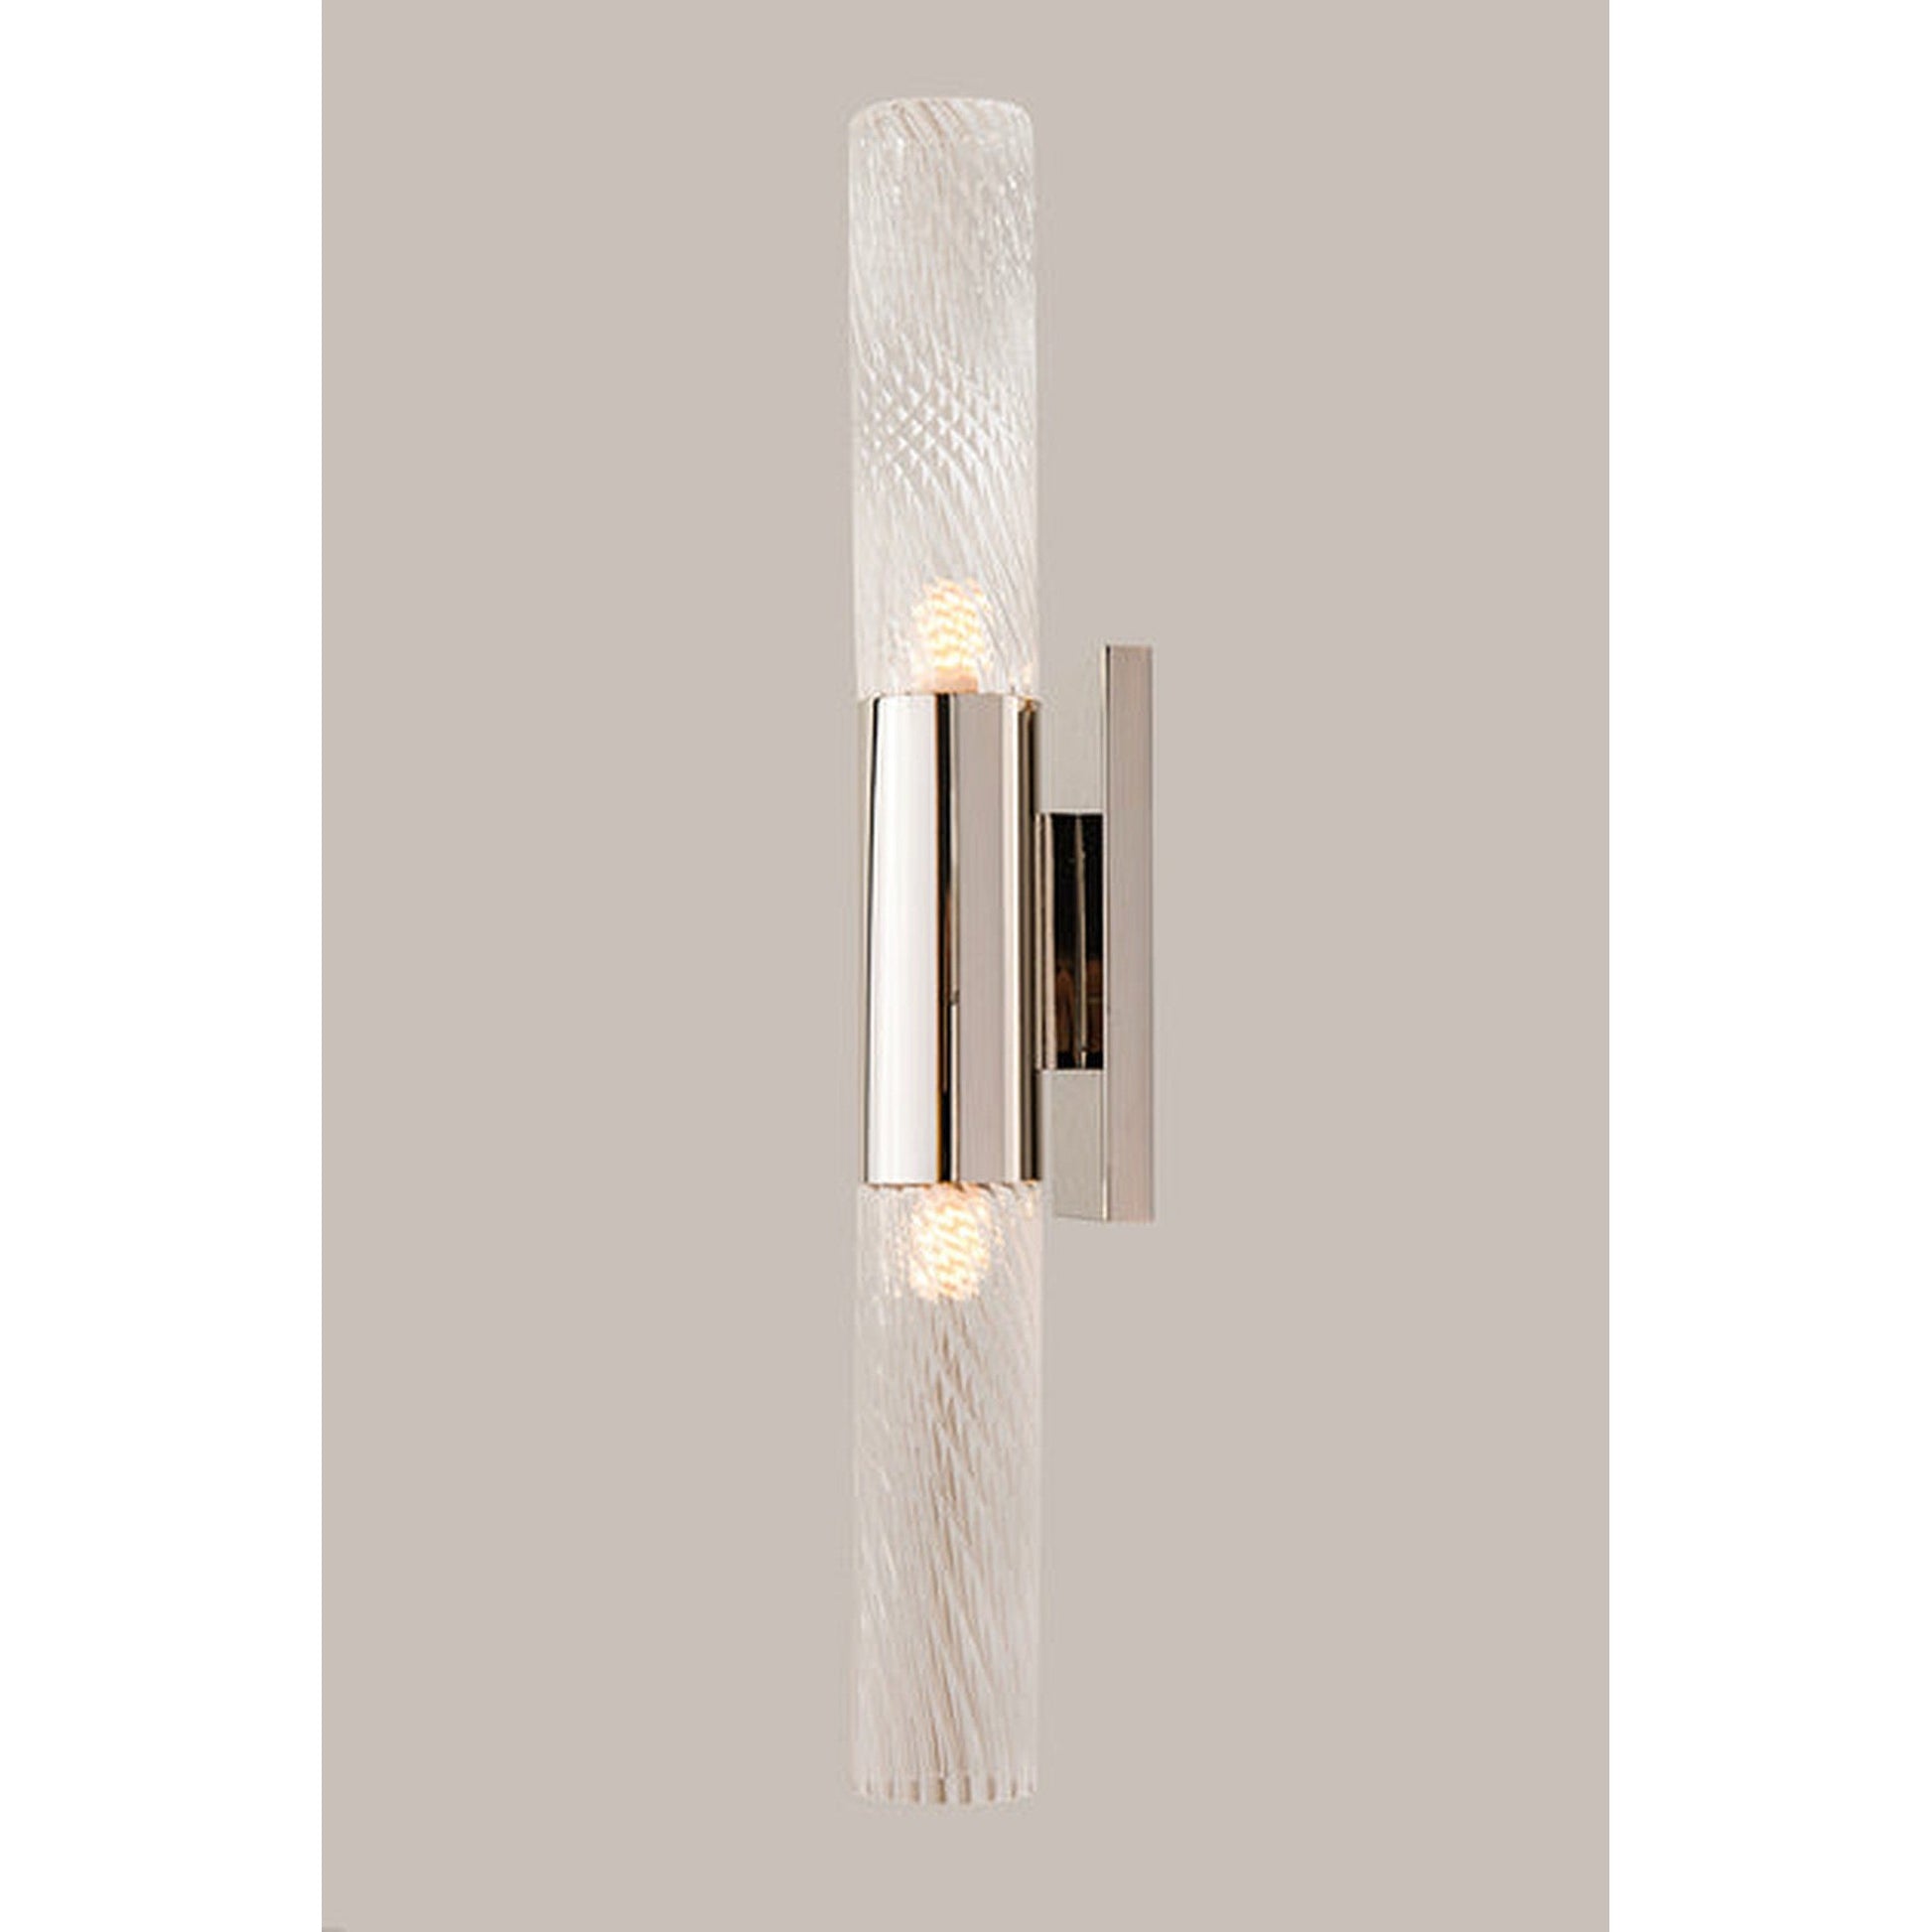 The Vault Samantha Wall Sconce - Turnberry Polished Stainless Steel